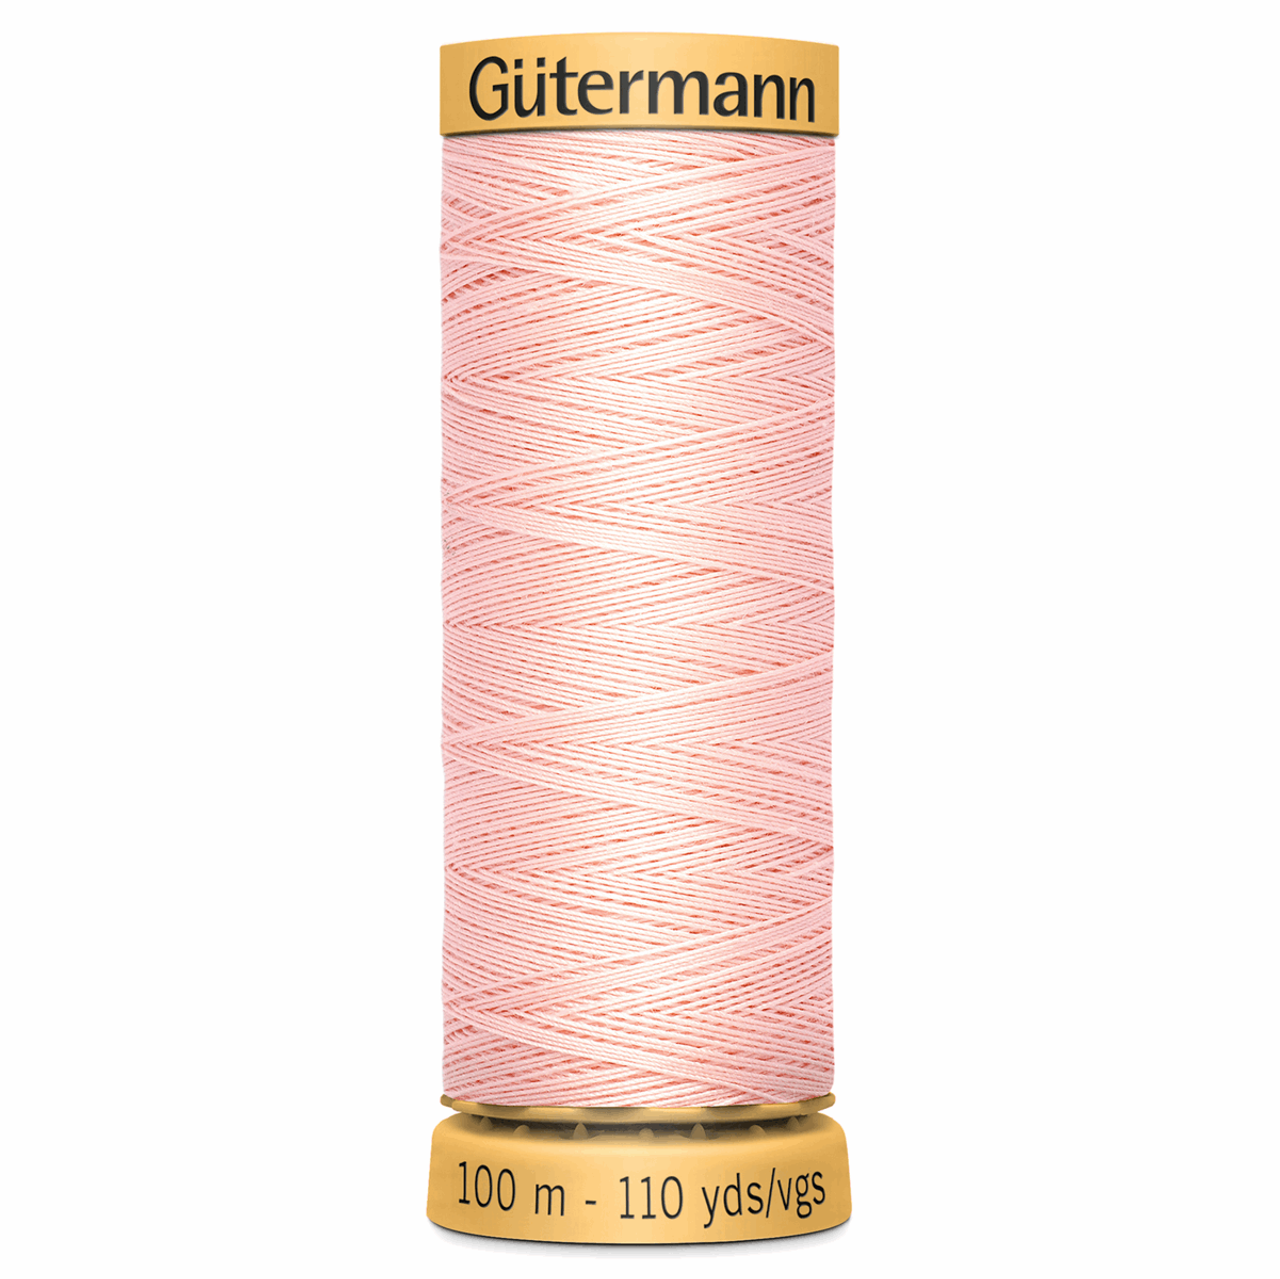 2228 Natural Cotton Sewing Thread 100mtr Spool